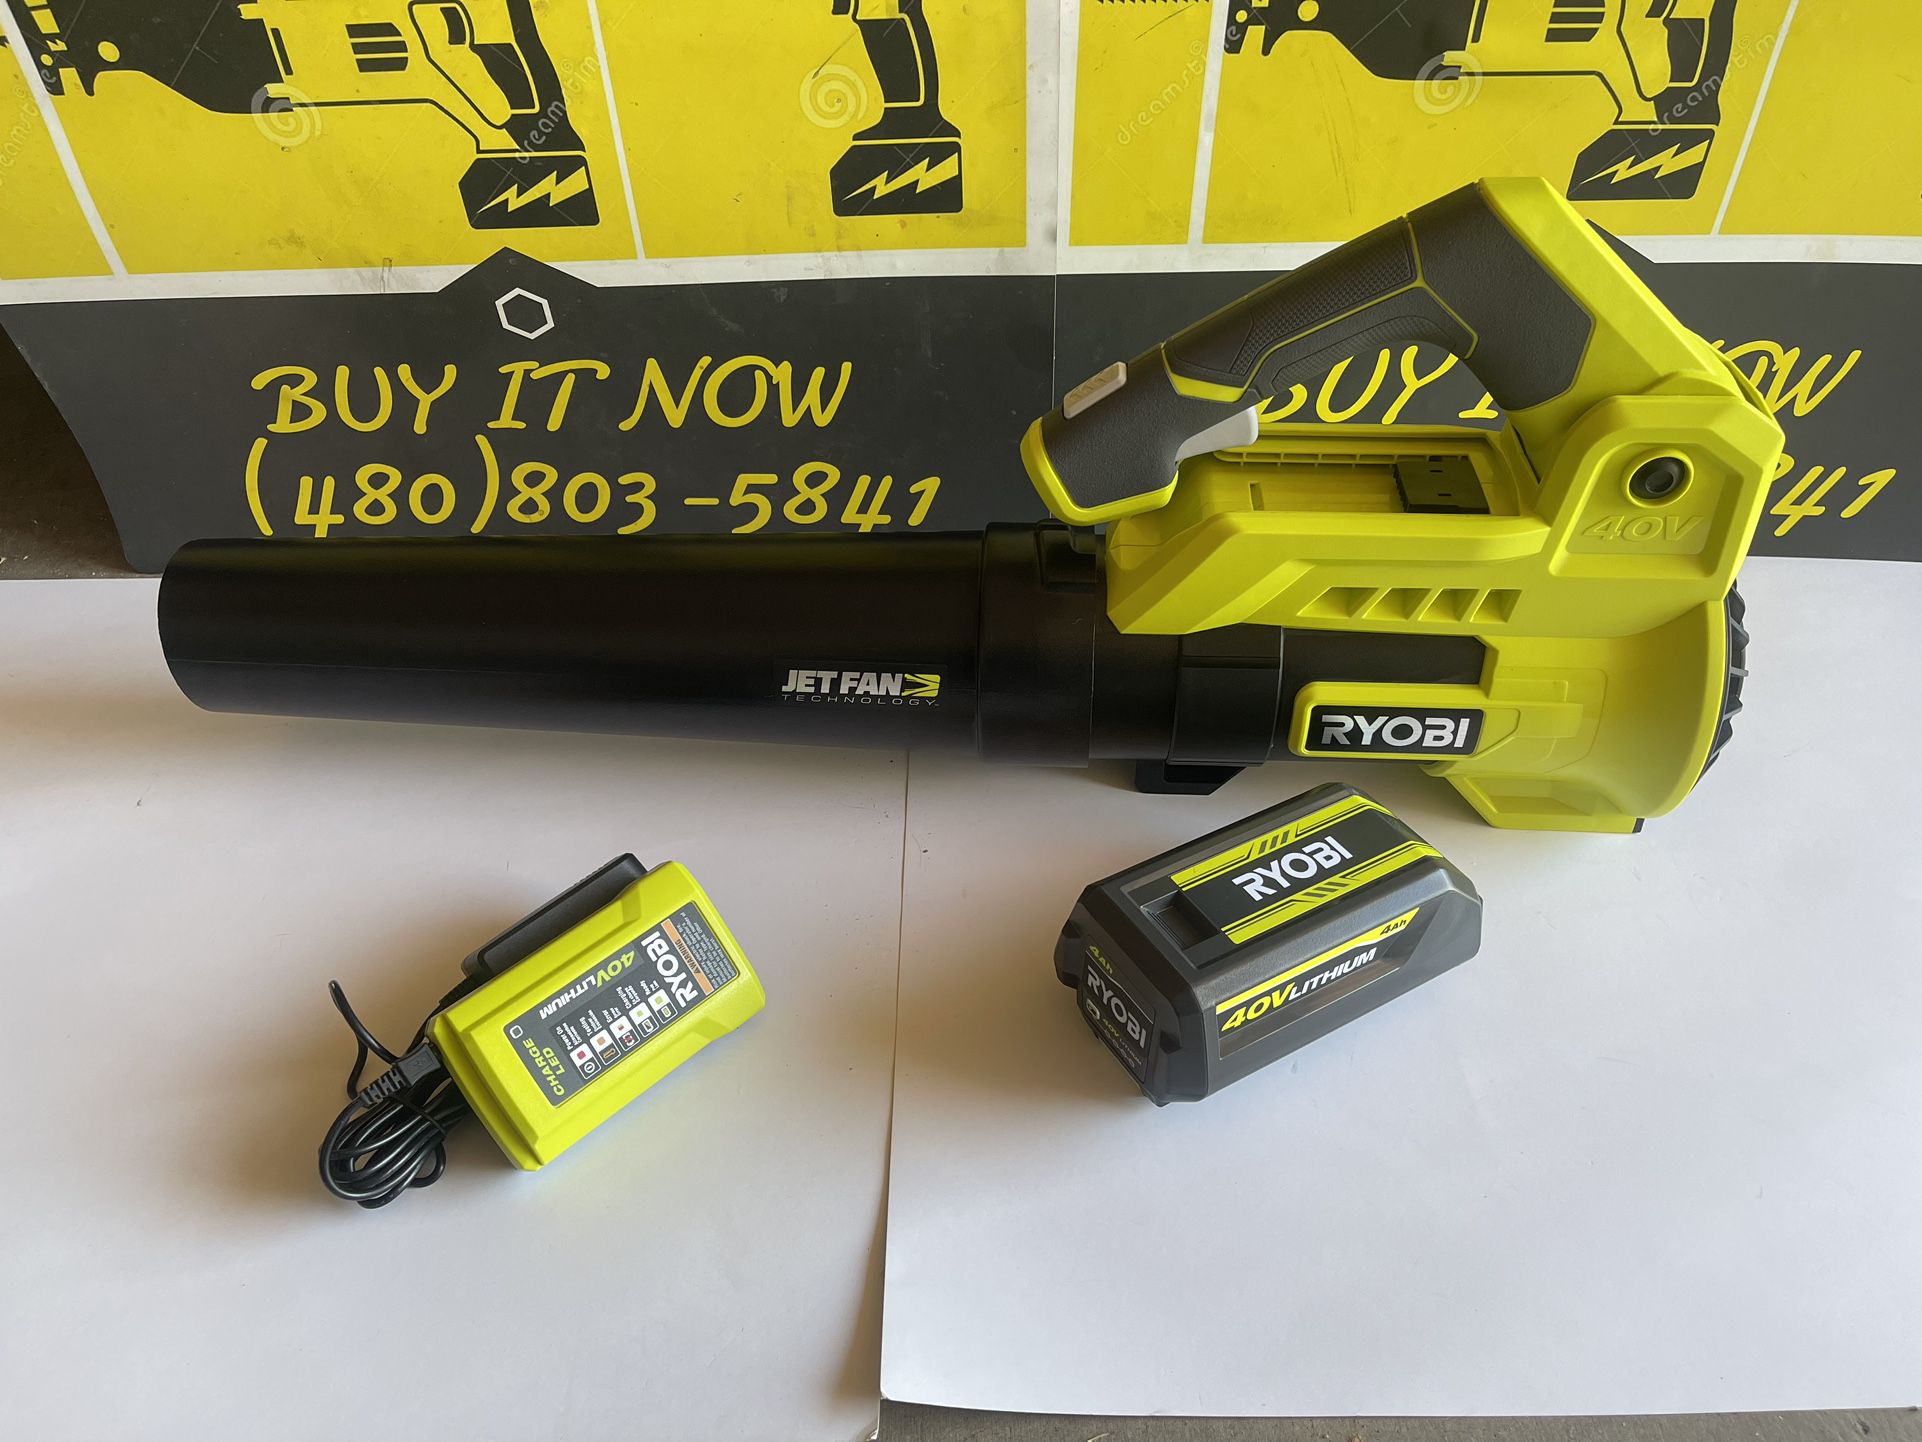 RYOBI 40V 110 MPH 525 CFM Cordless Battery Variable-Speed Jet Fan Leaf Blower with 4.0 Ah Battery and Charger